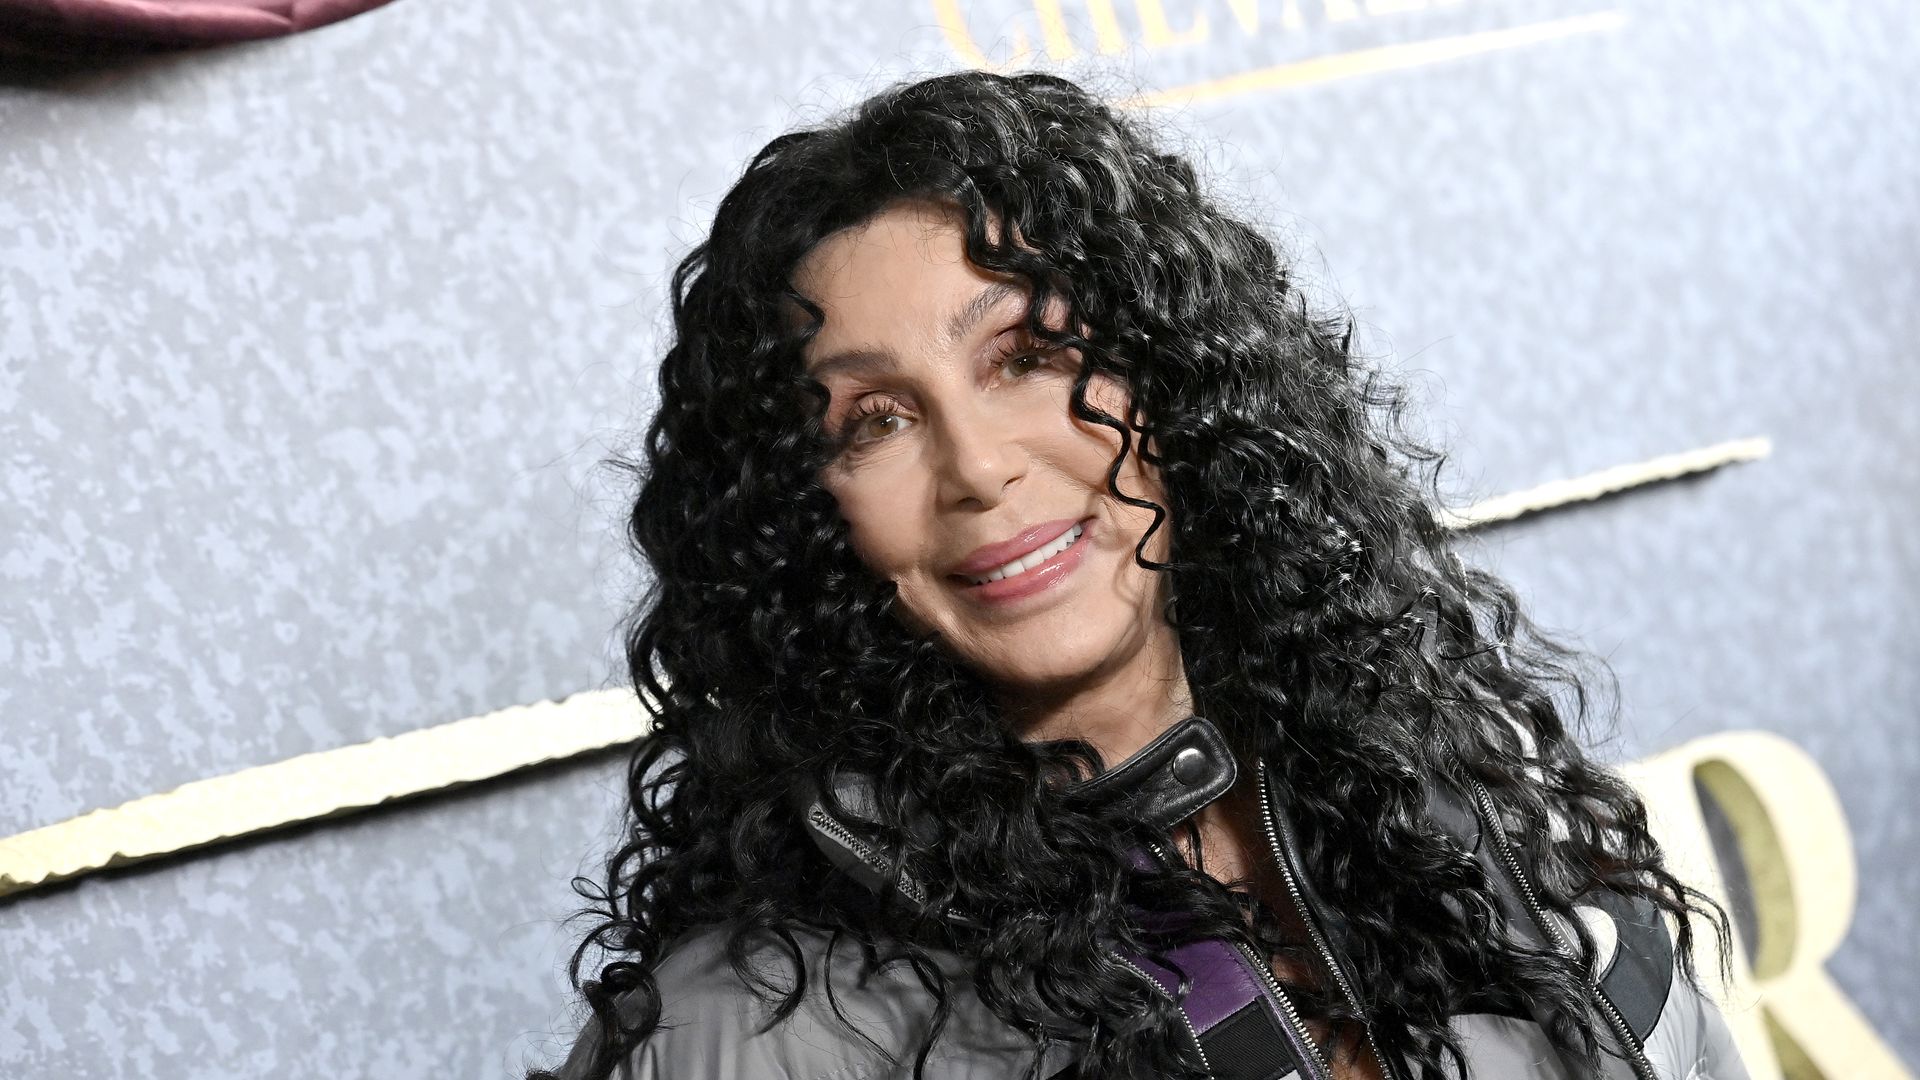 Cher shows off her curly black hair and wears a puffer jacket